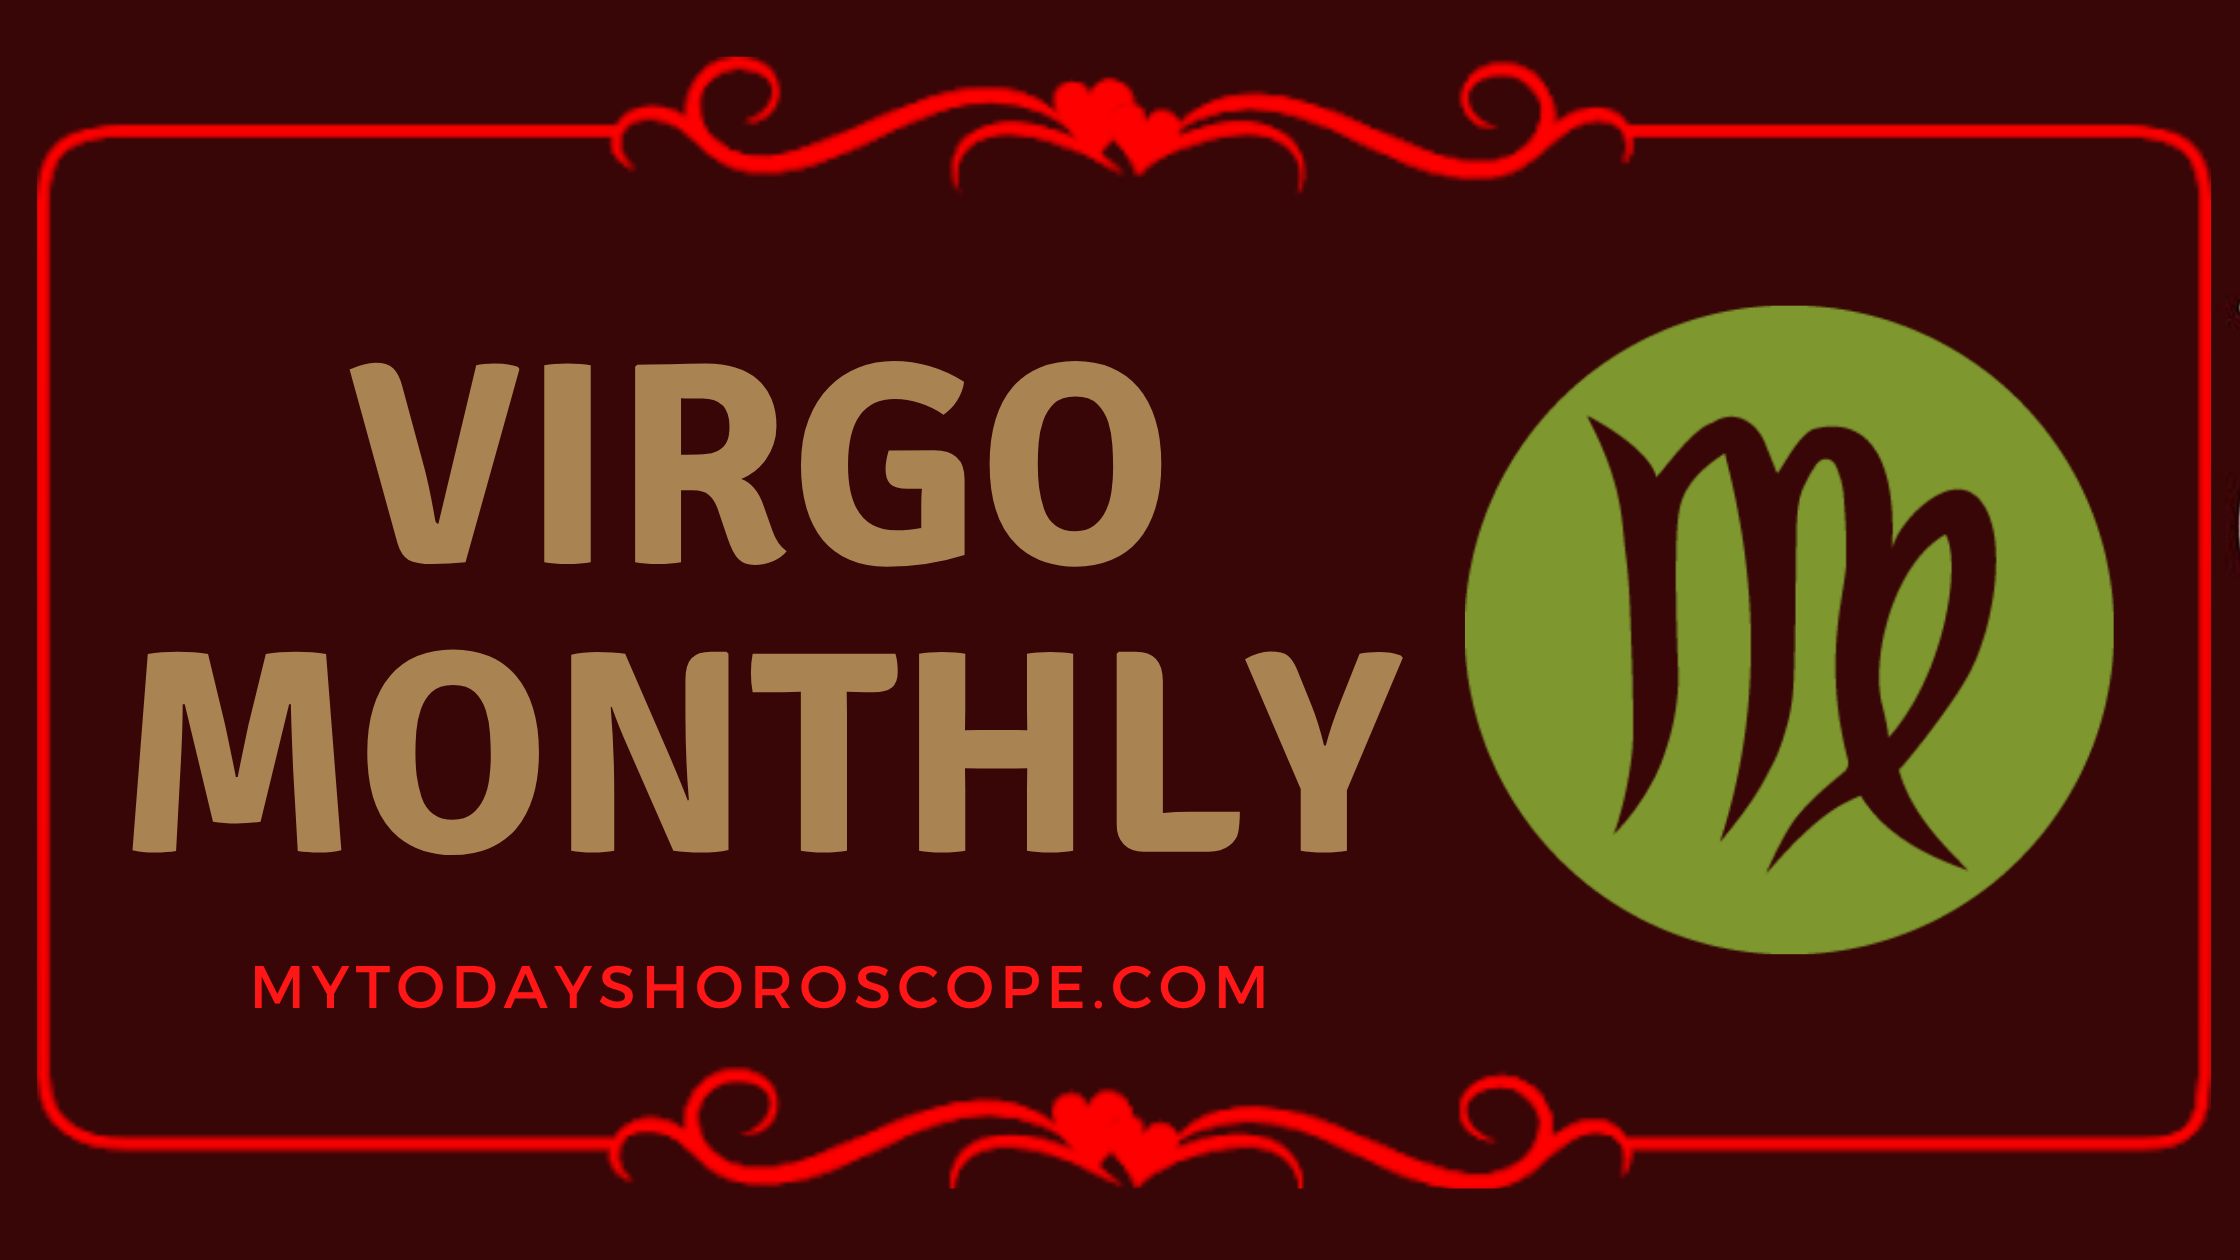 Virgo Monthly Love, Work and Well Being Horoscope